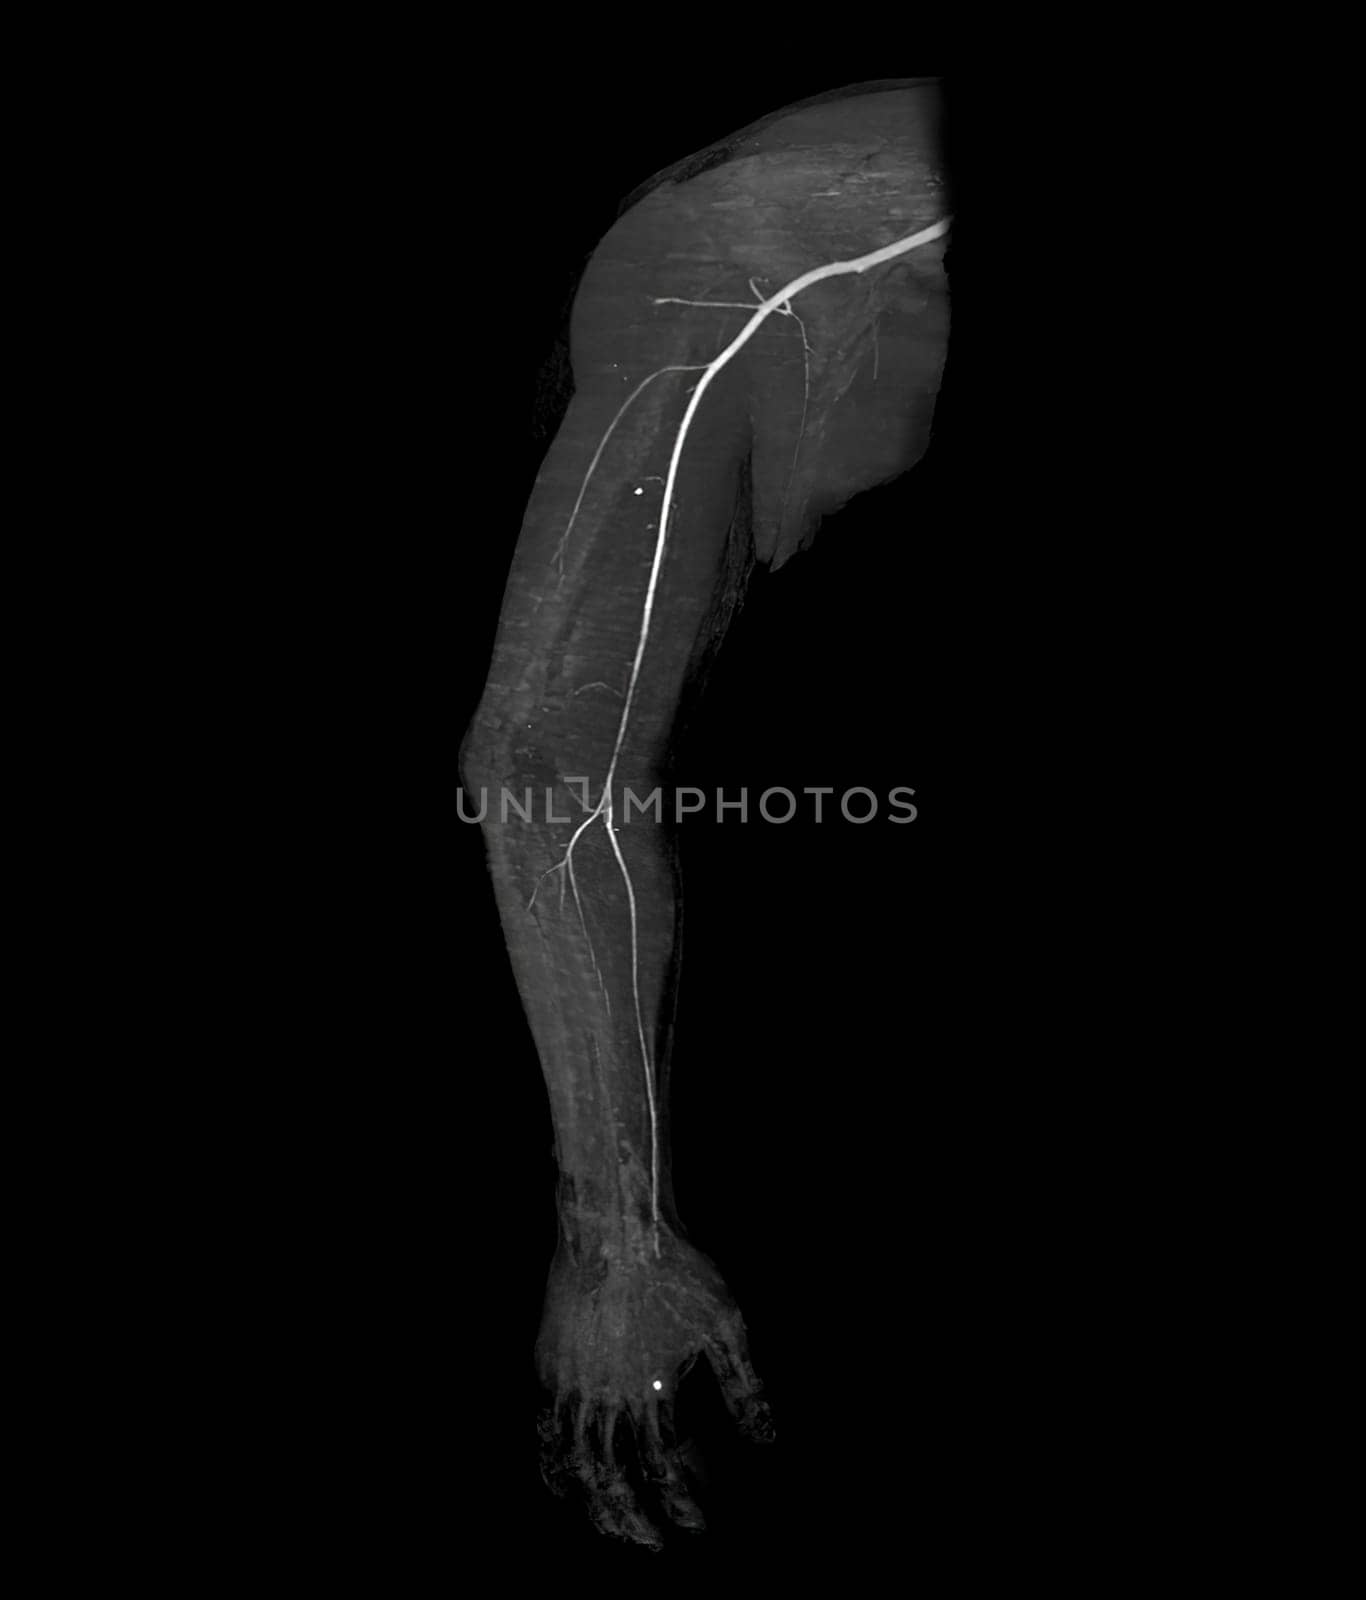 CTA brachial artery or CT scan of upper extremity 3D rendering image .